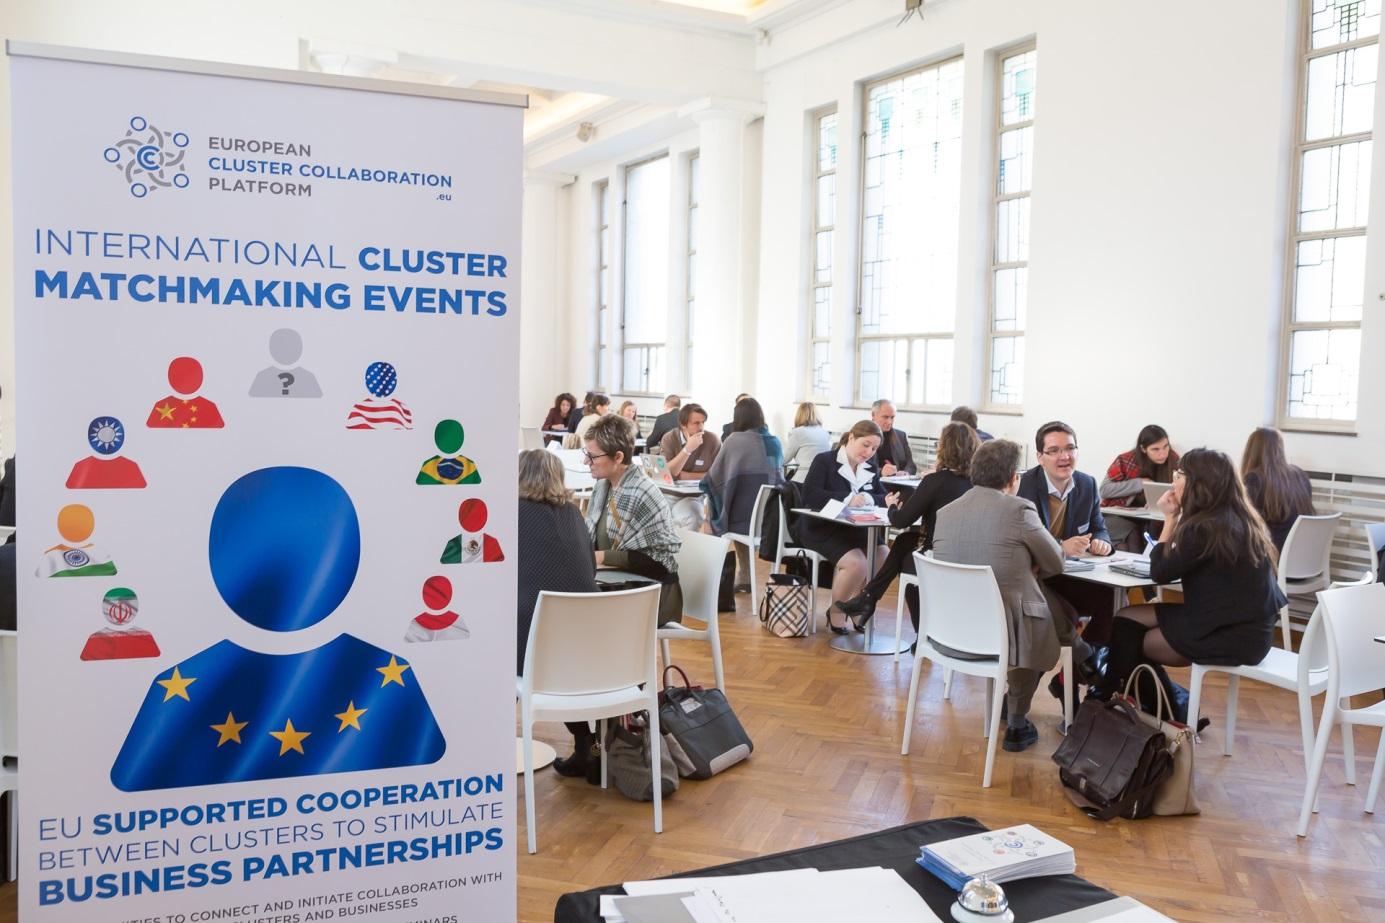 \Users\Lucia Seel\Documents\3 ECCP 3.0\matchmaking events\Brussels Dec 2016\_S8B3209.jpg